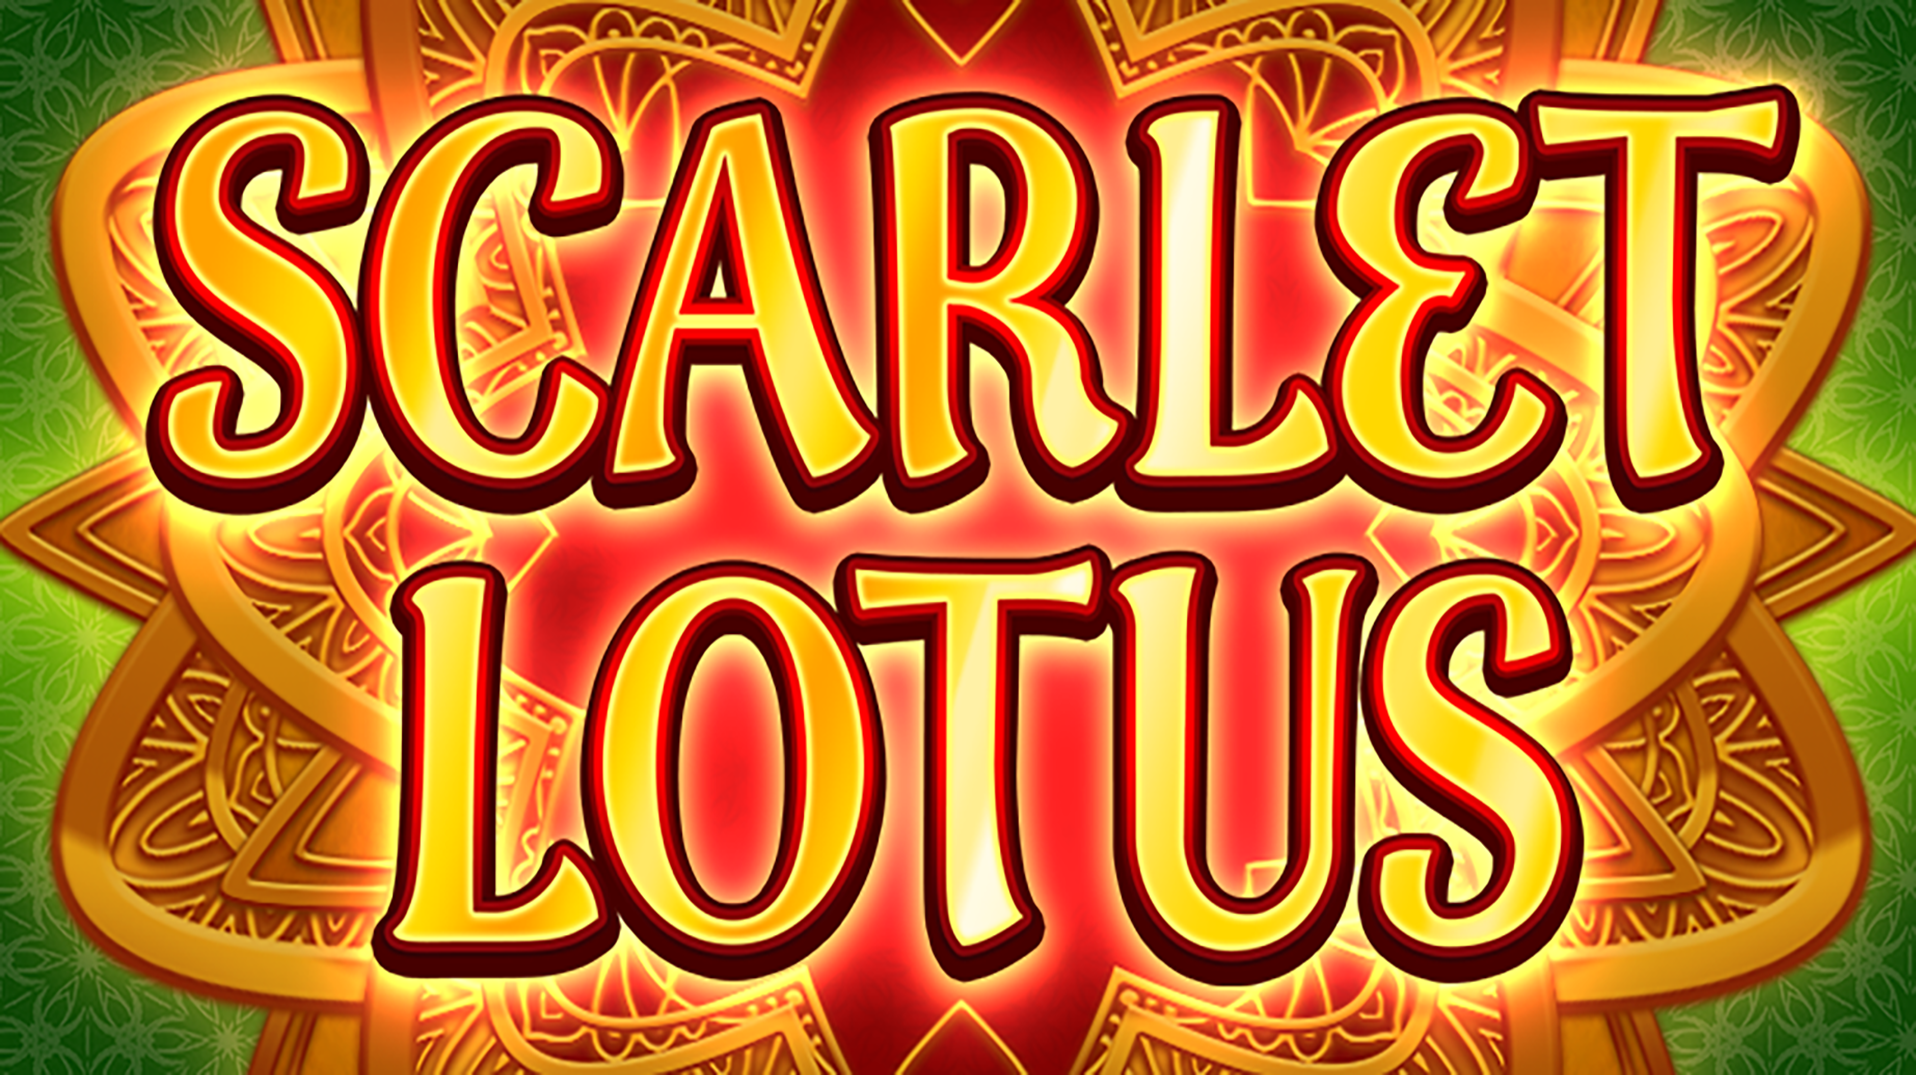 Picture for Scarlet Lotus